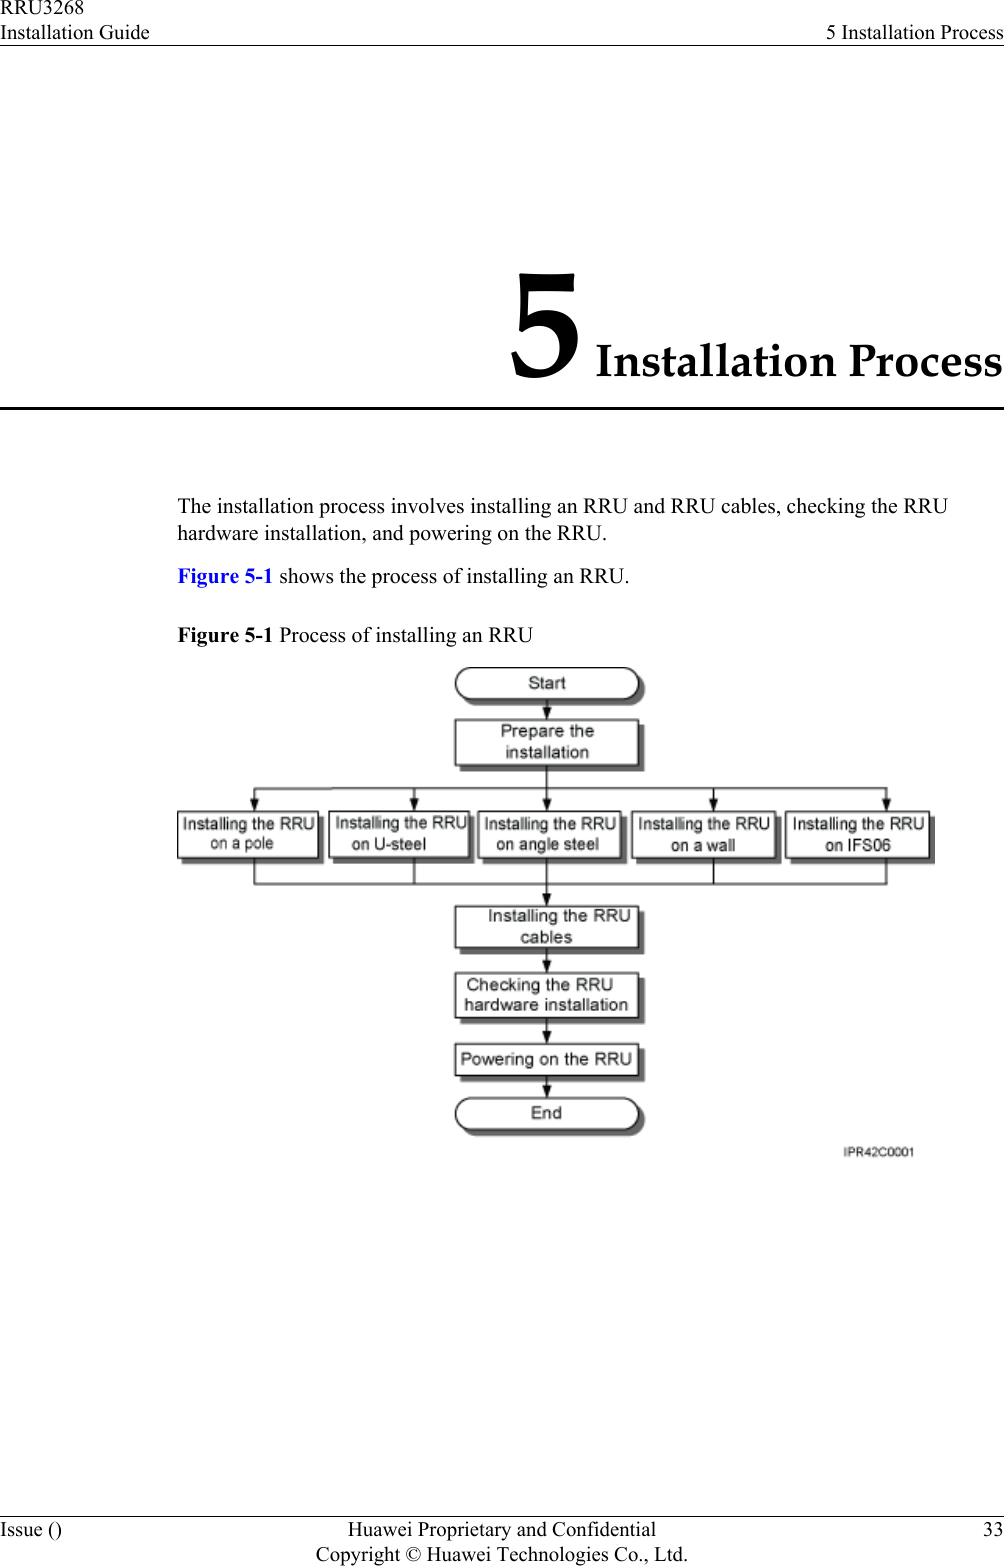 5 Installation ProcessThe installation process involves installing an RRU and RRU cables, checking the RRUhardware installation, and powering on the RRU.Figure 5-1 shows the process of installing an RRU.Figure 5-1 Process of installing an RRURRU3268Installation Guide 5 Installation ProcessIssue () Huawei Proprietary and ConfidentialCopyright © Huawei Technologies Co., Ltd.33